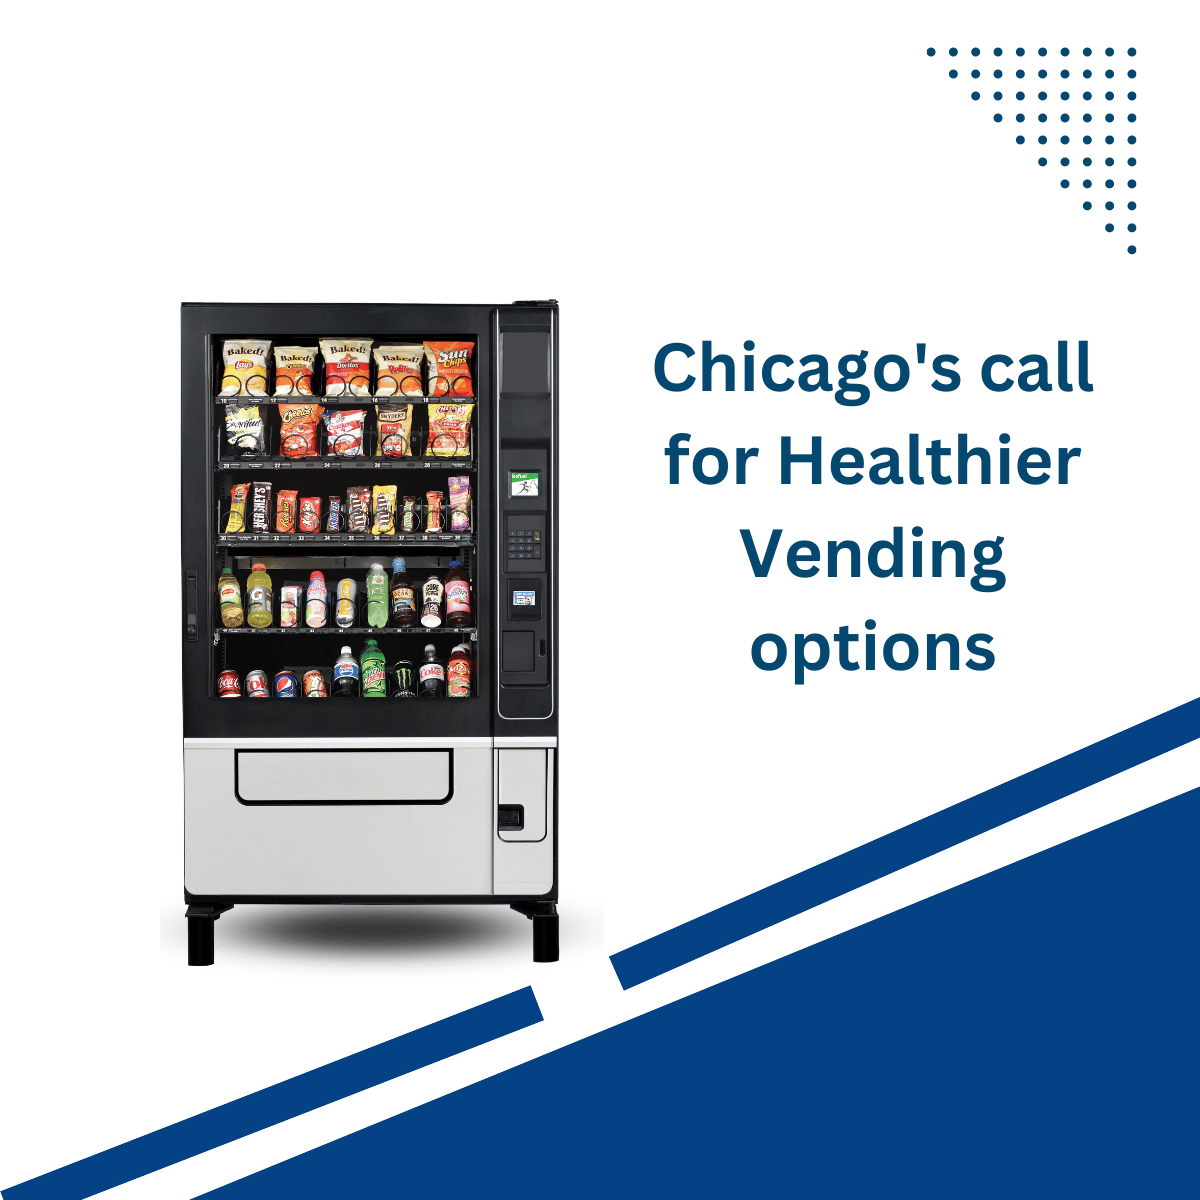 CHICAGO ISSUES HEALTHY VENDING CHALLENGE